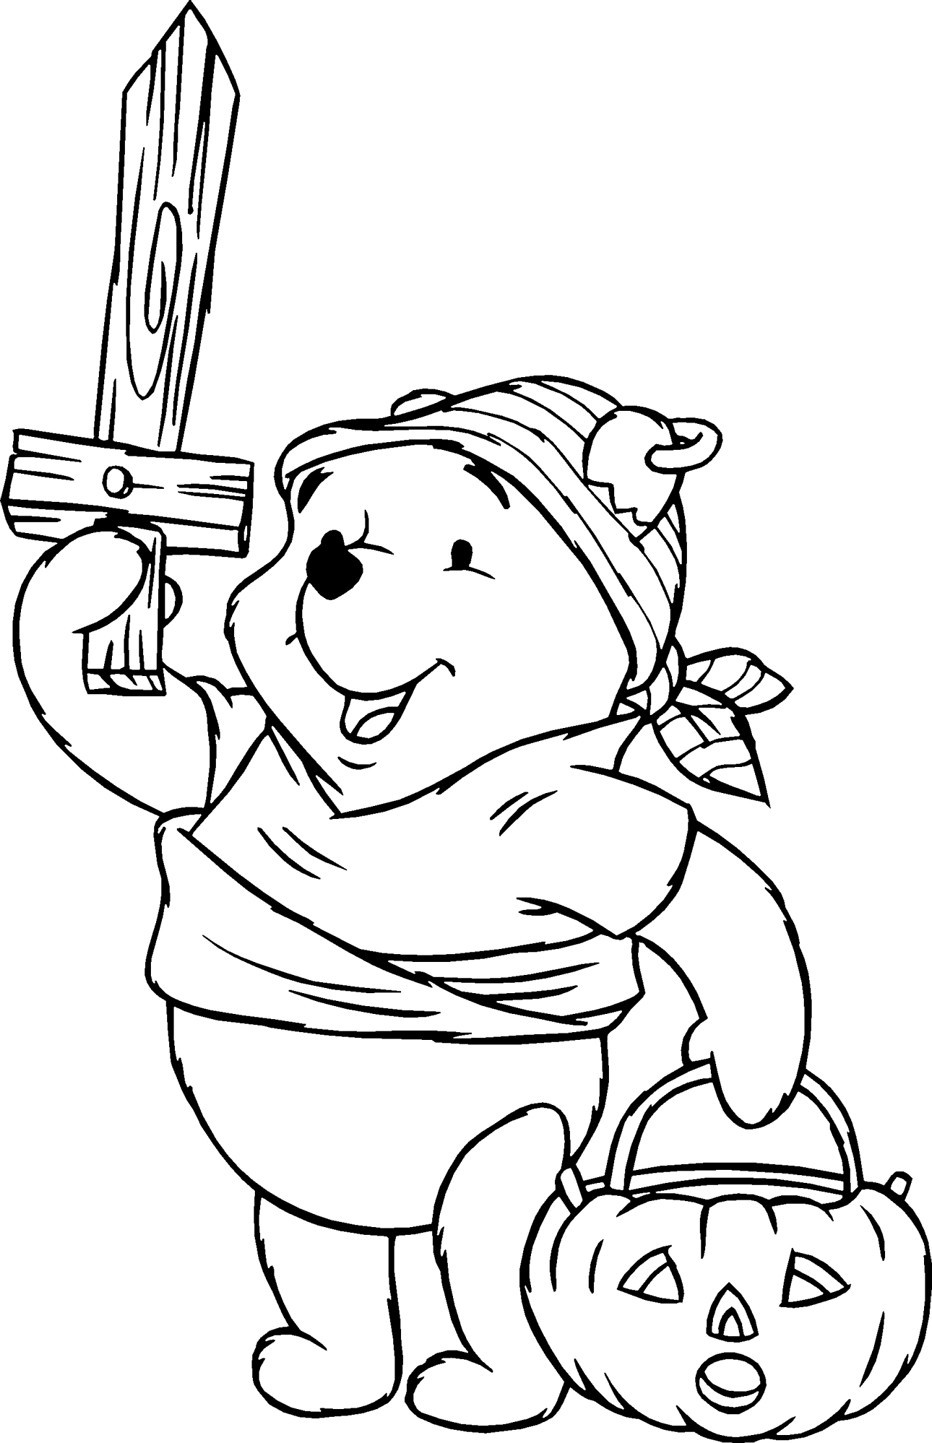 Free Coloring Pages For Kids To Print
 24 Free Printable Halloween Coloring Pages for Kids